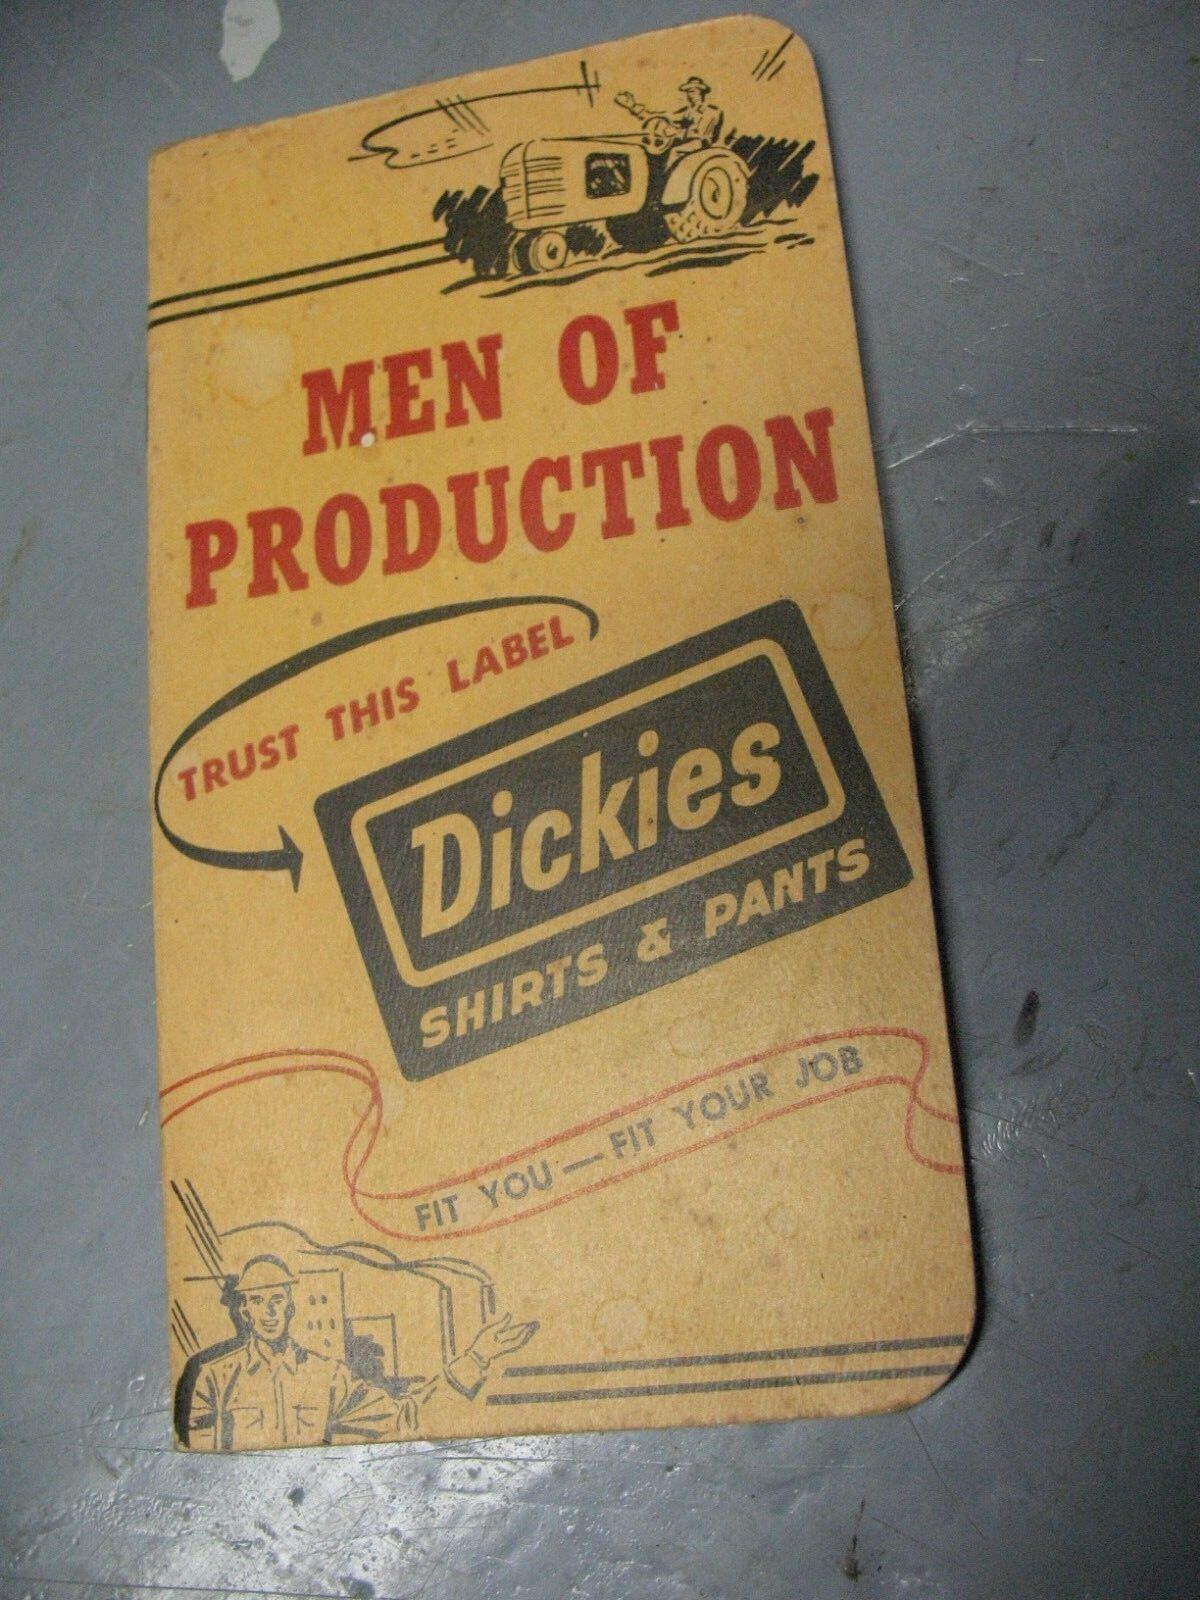 DICKIES SHIRTS & PANTS  MEN OF PRODUCTION LIMA  N Y 1952 MEMO  BOOKLET w/  ADS  